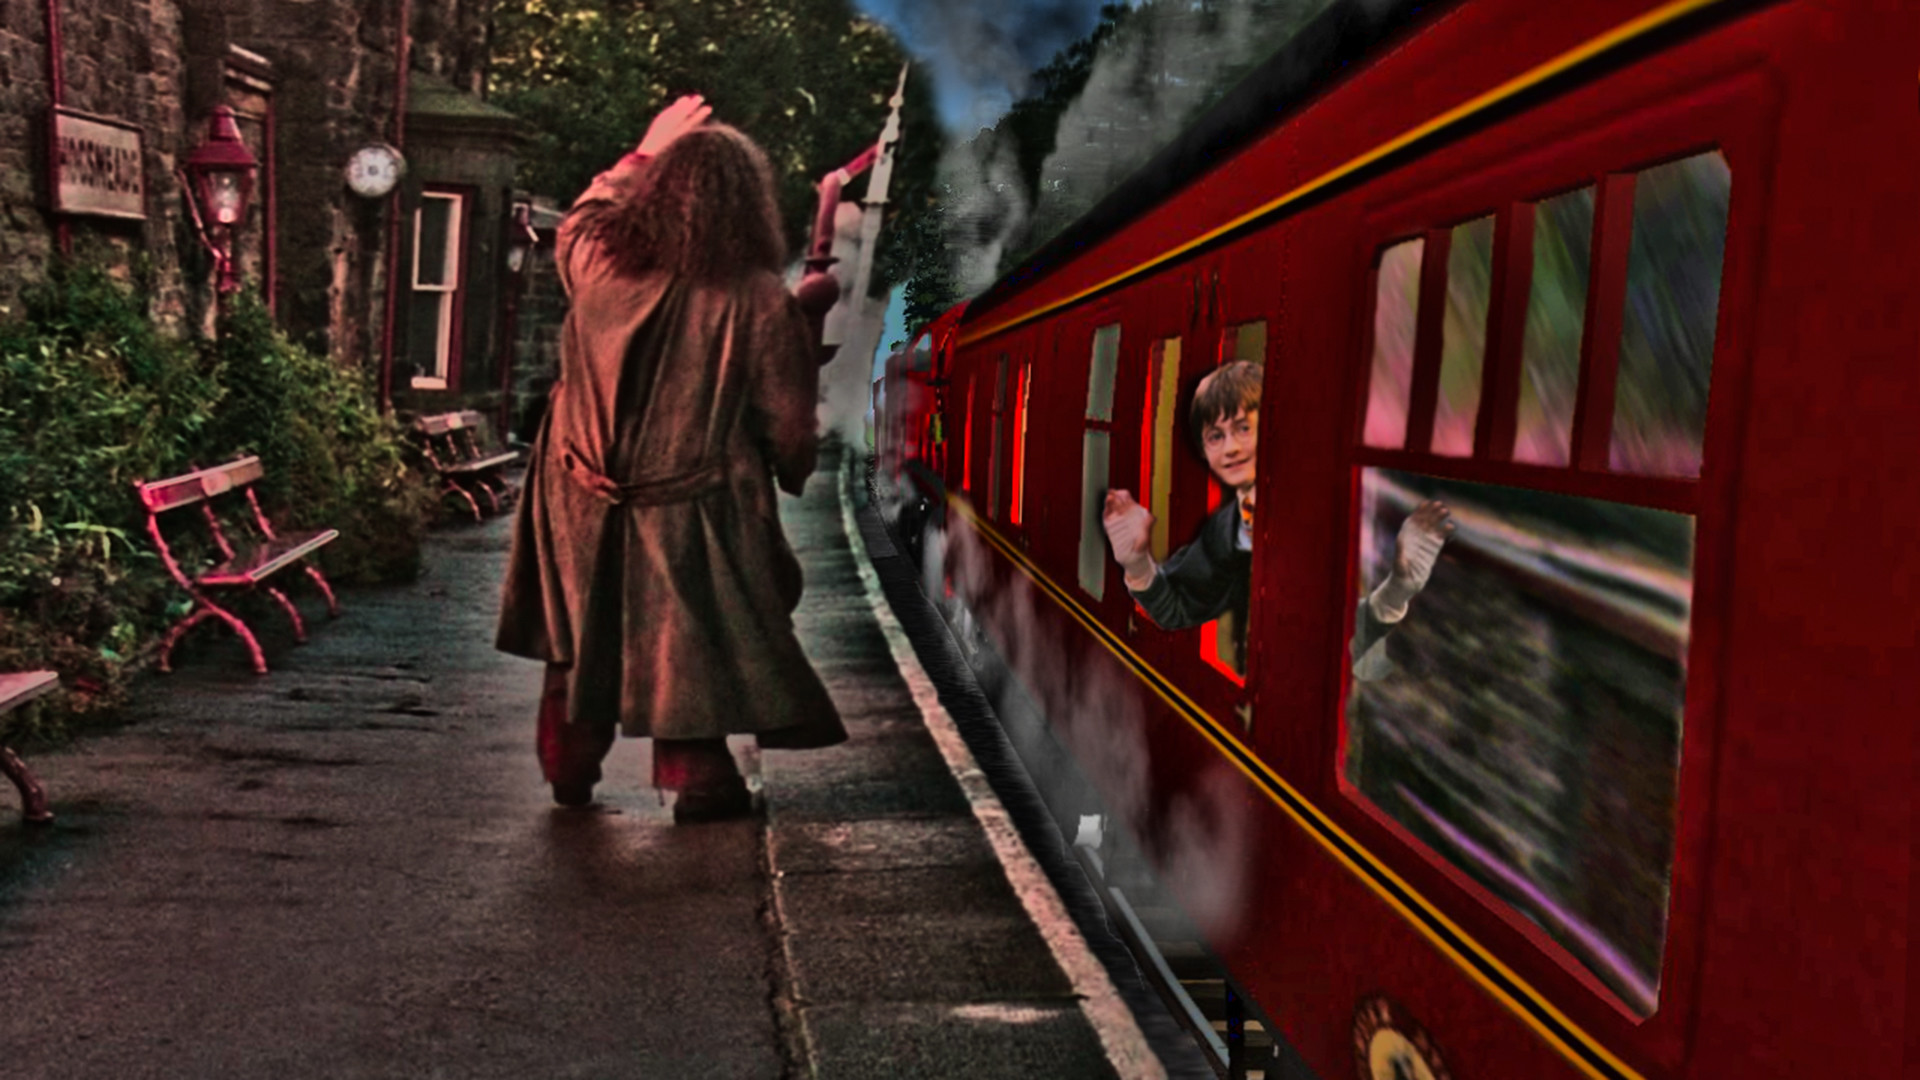 1920x1080 ... CaledonianScot812 Hogwarts Will Always Be There To Welcome You Home by  CaledonianScot812